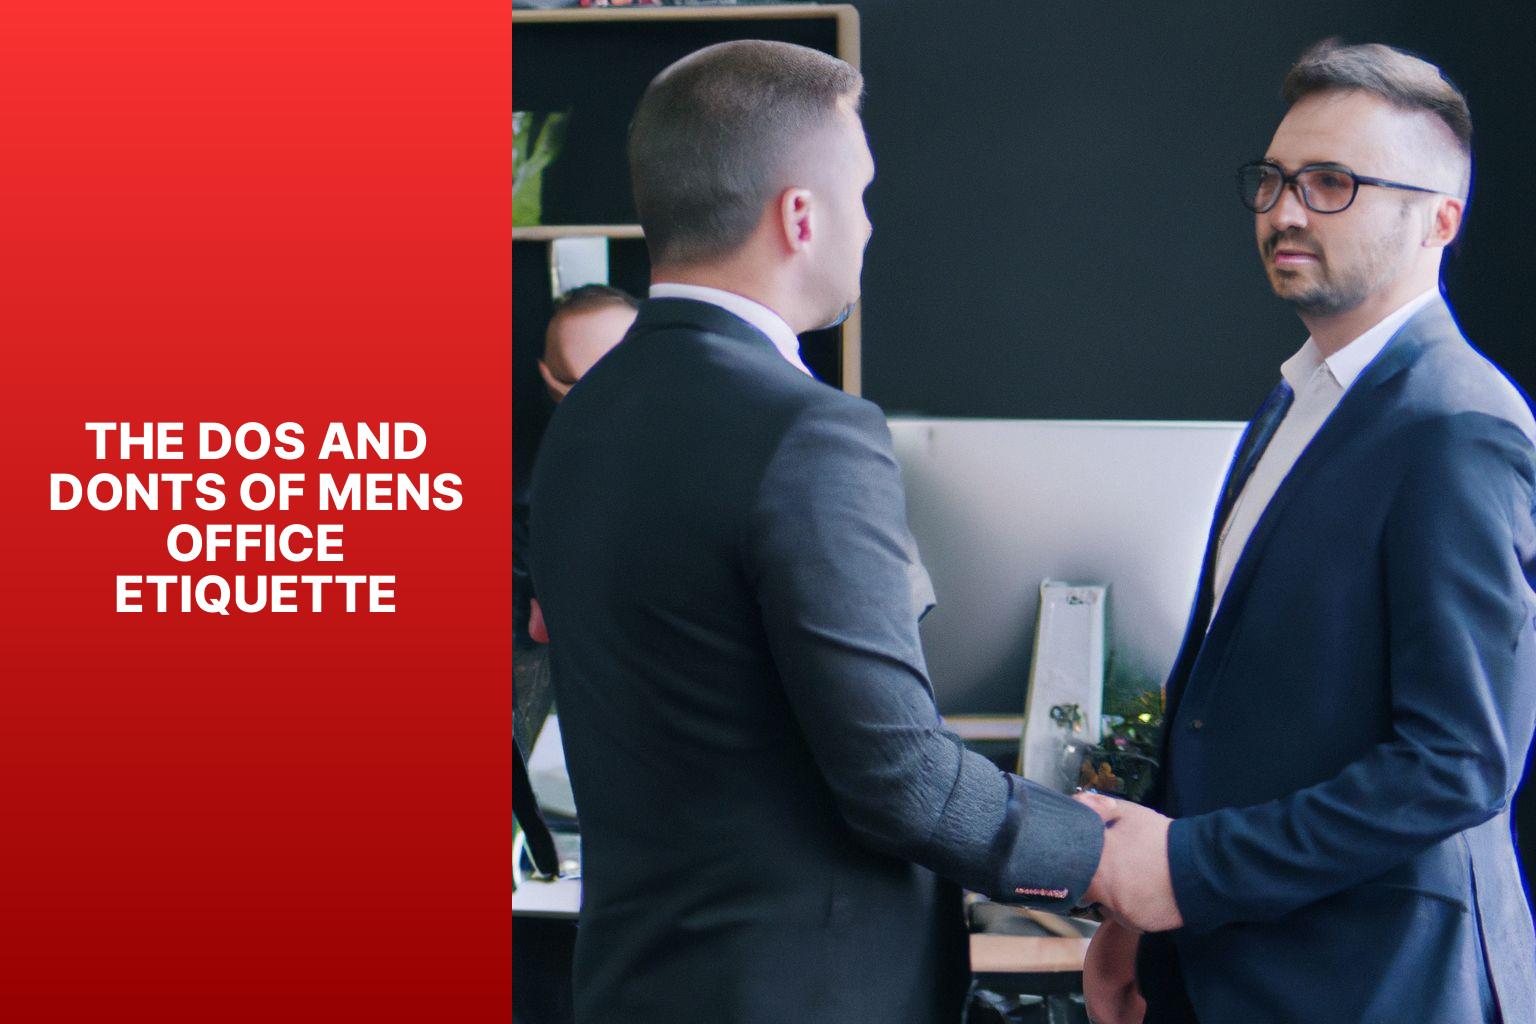 The Dos and Don’ts of Men’s Office Etiquette